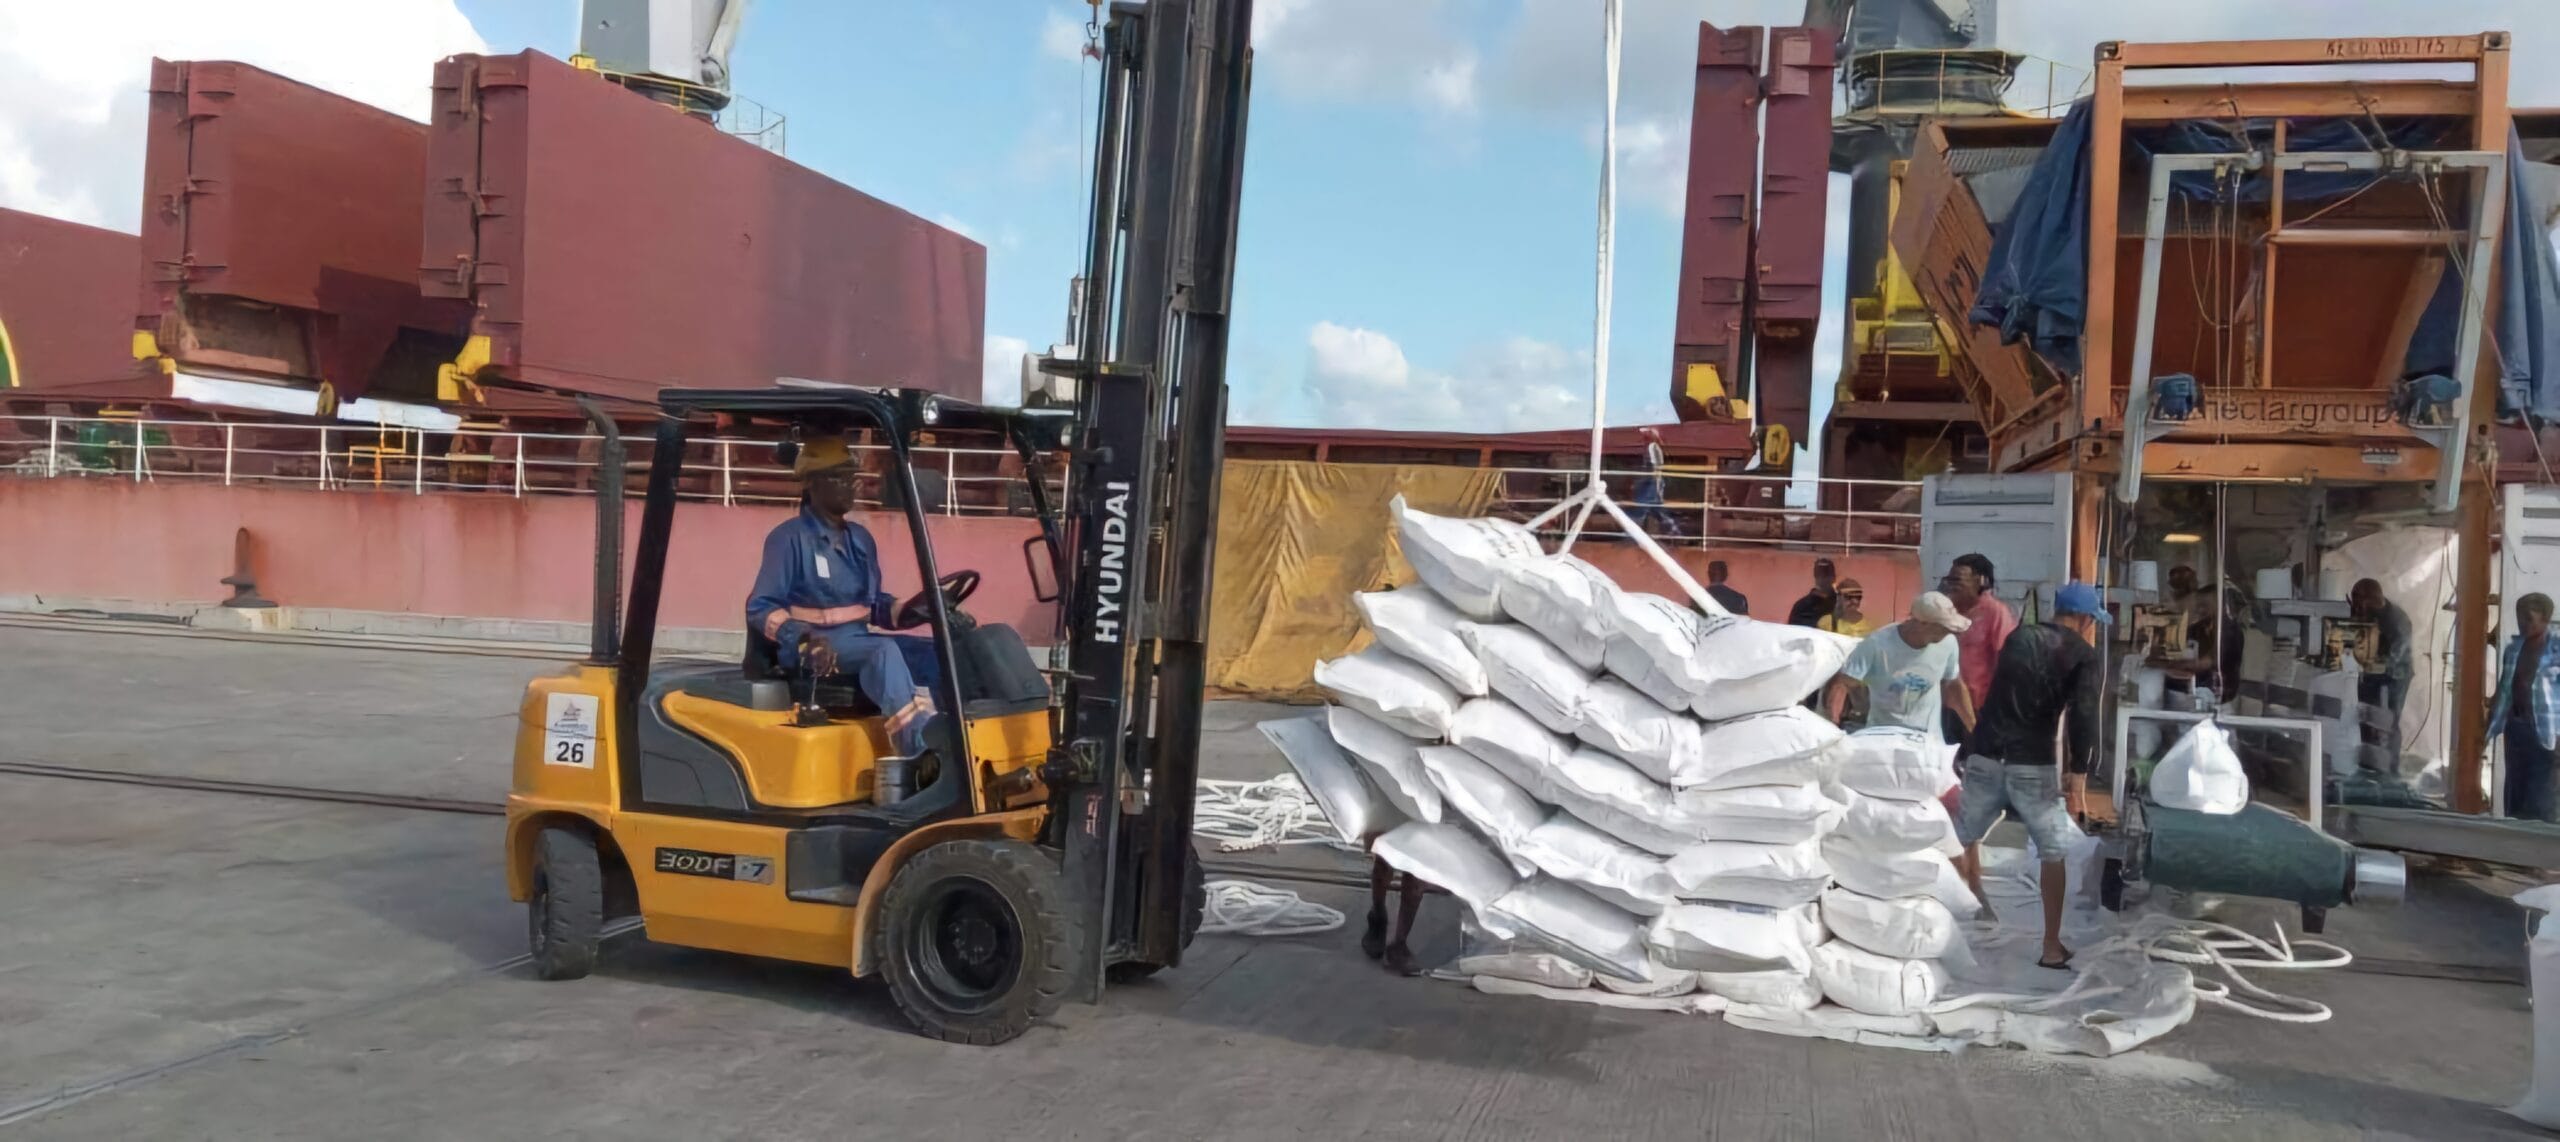 Rice donated by China arrives at Cuba's airport